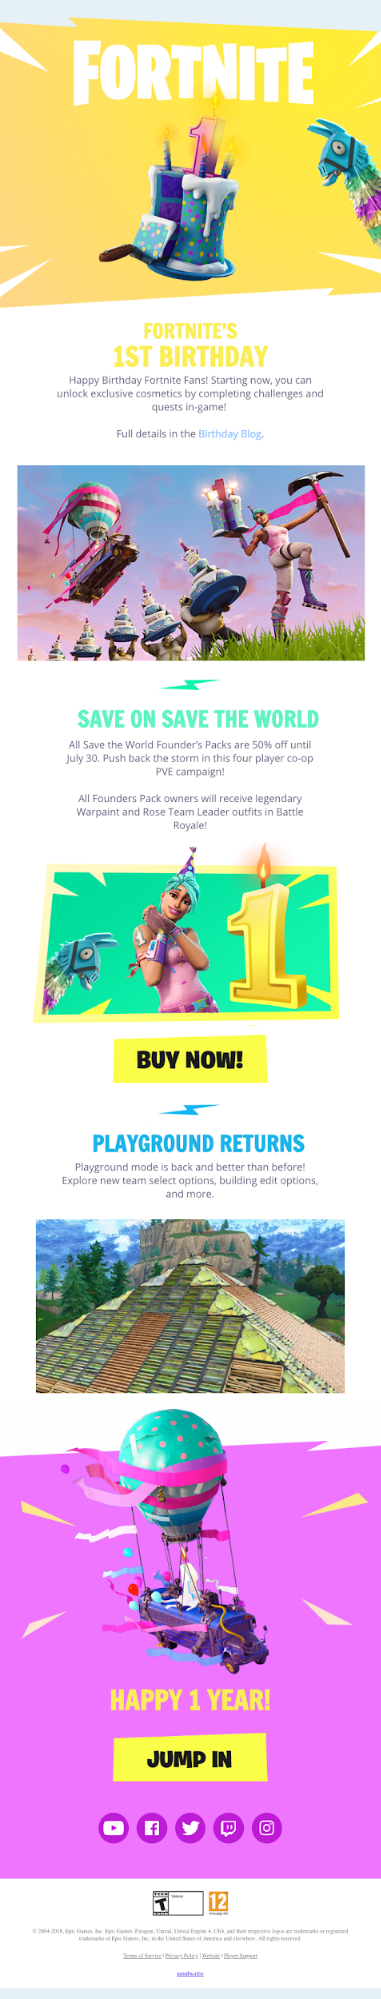 A milestone email by Fortnite